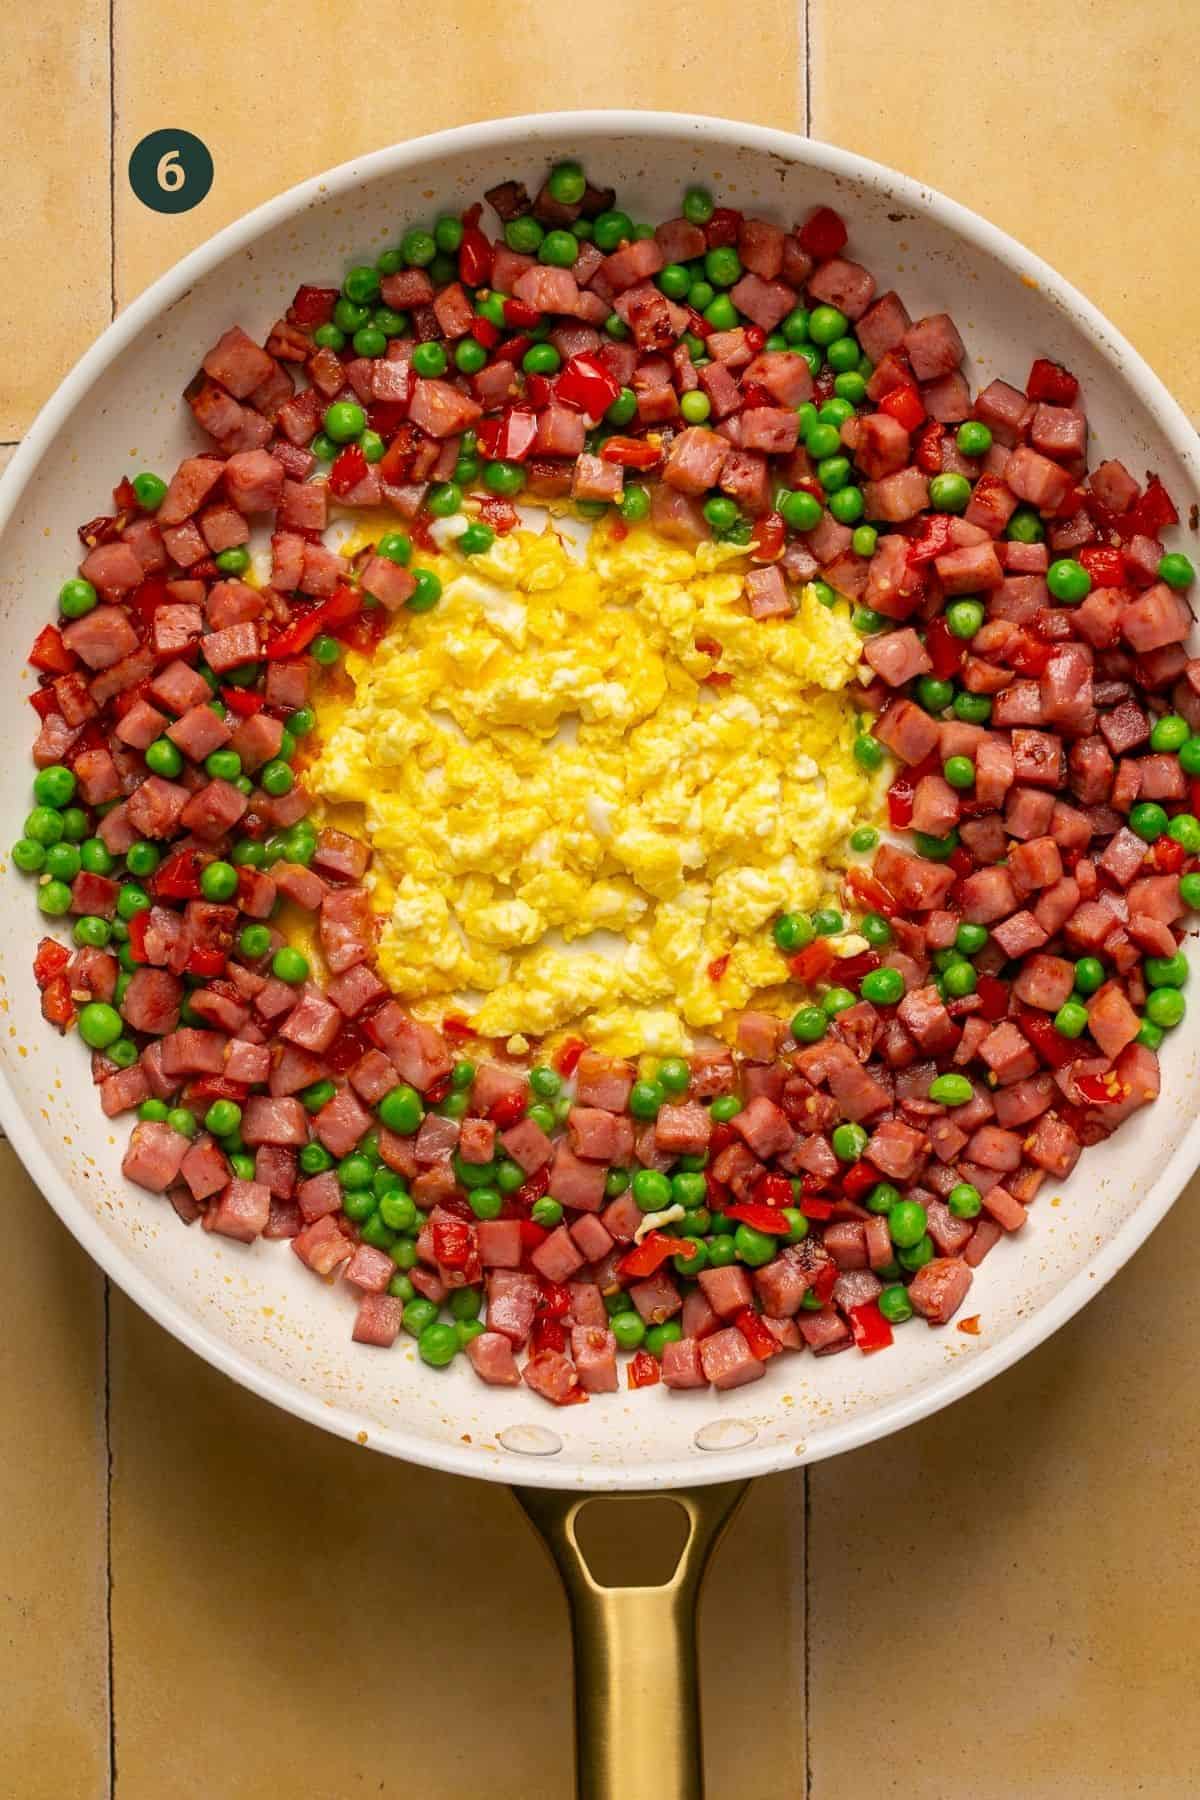 2 eggs scrambled in the center of ham and veggies in a pan.